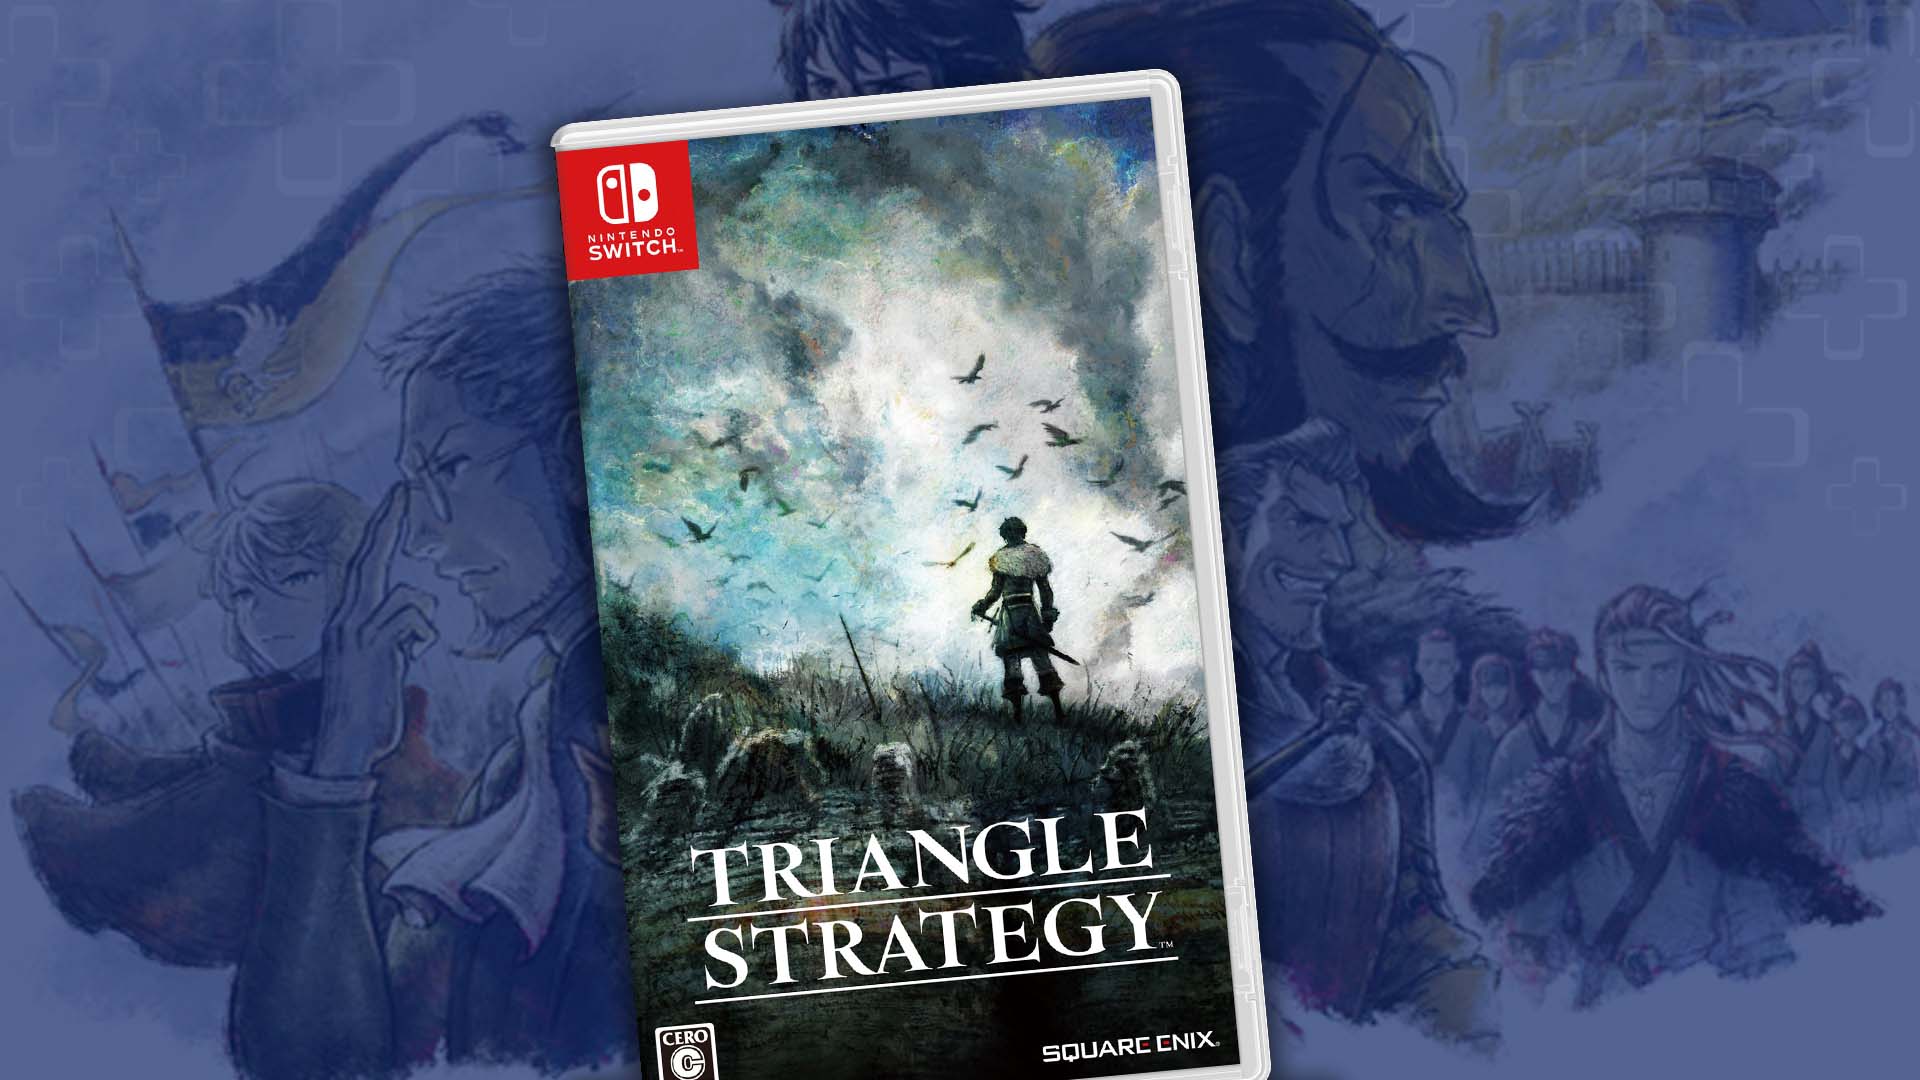 Square Enix reveal Triangle Strategy box art to celebrate the New Year Nintendo Wire